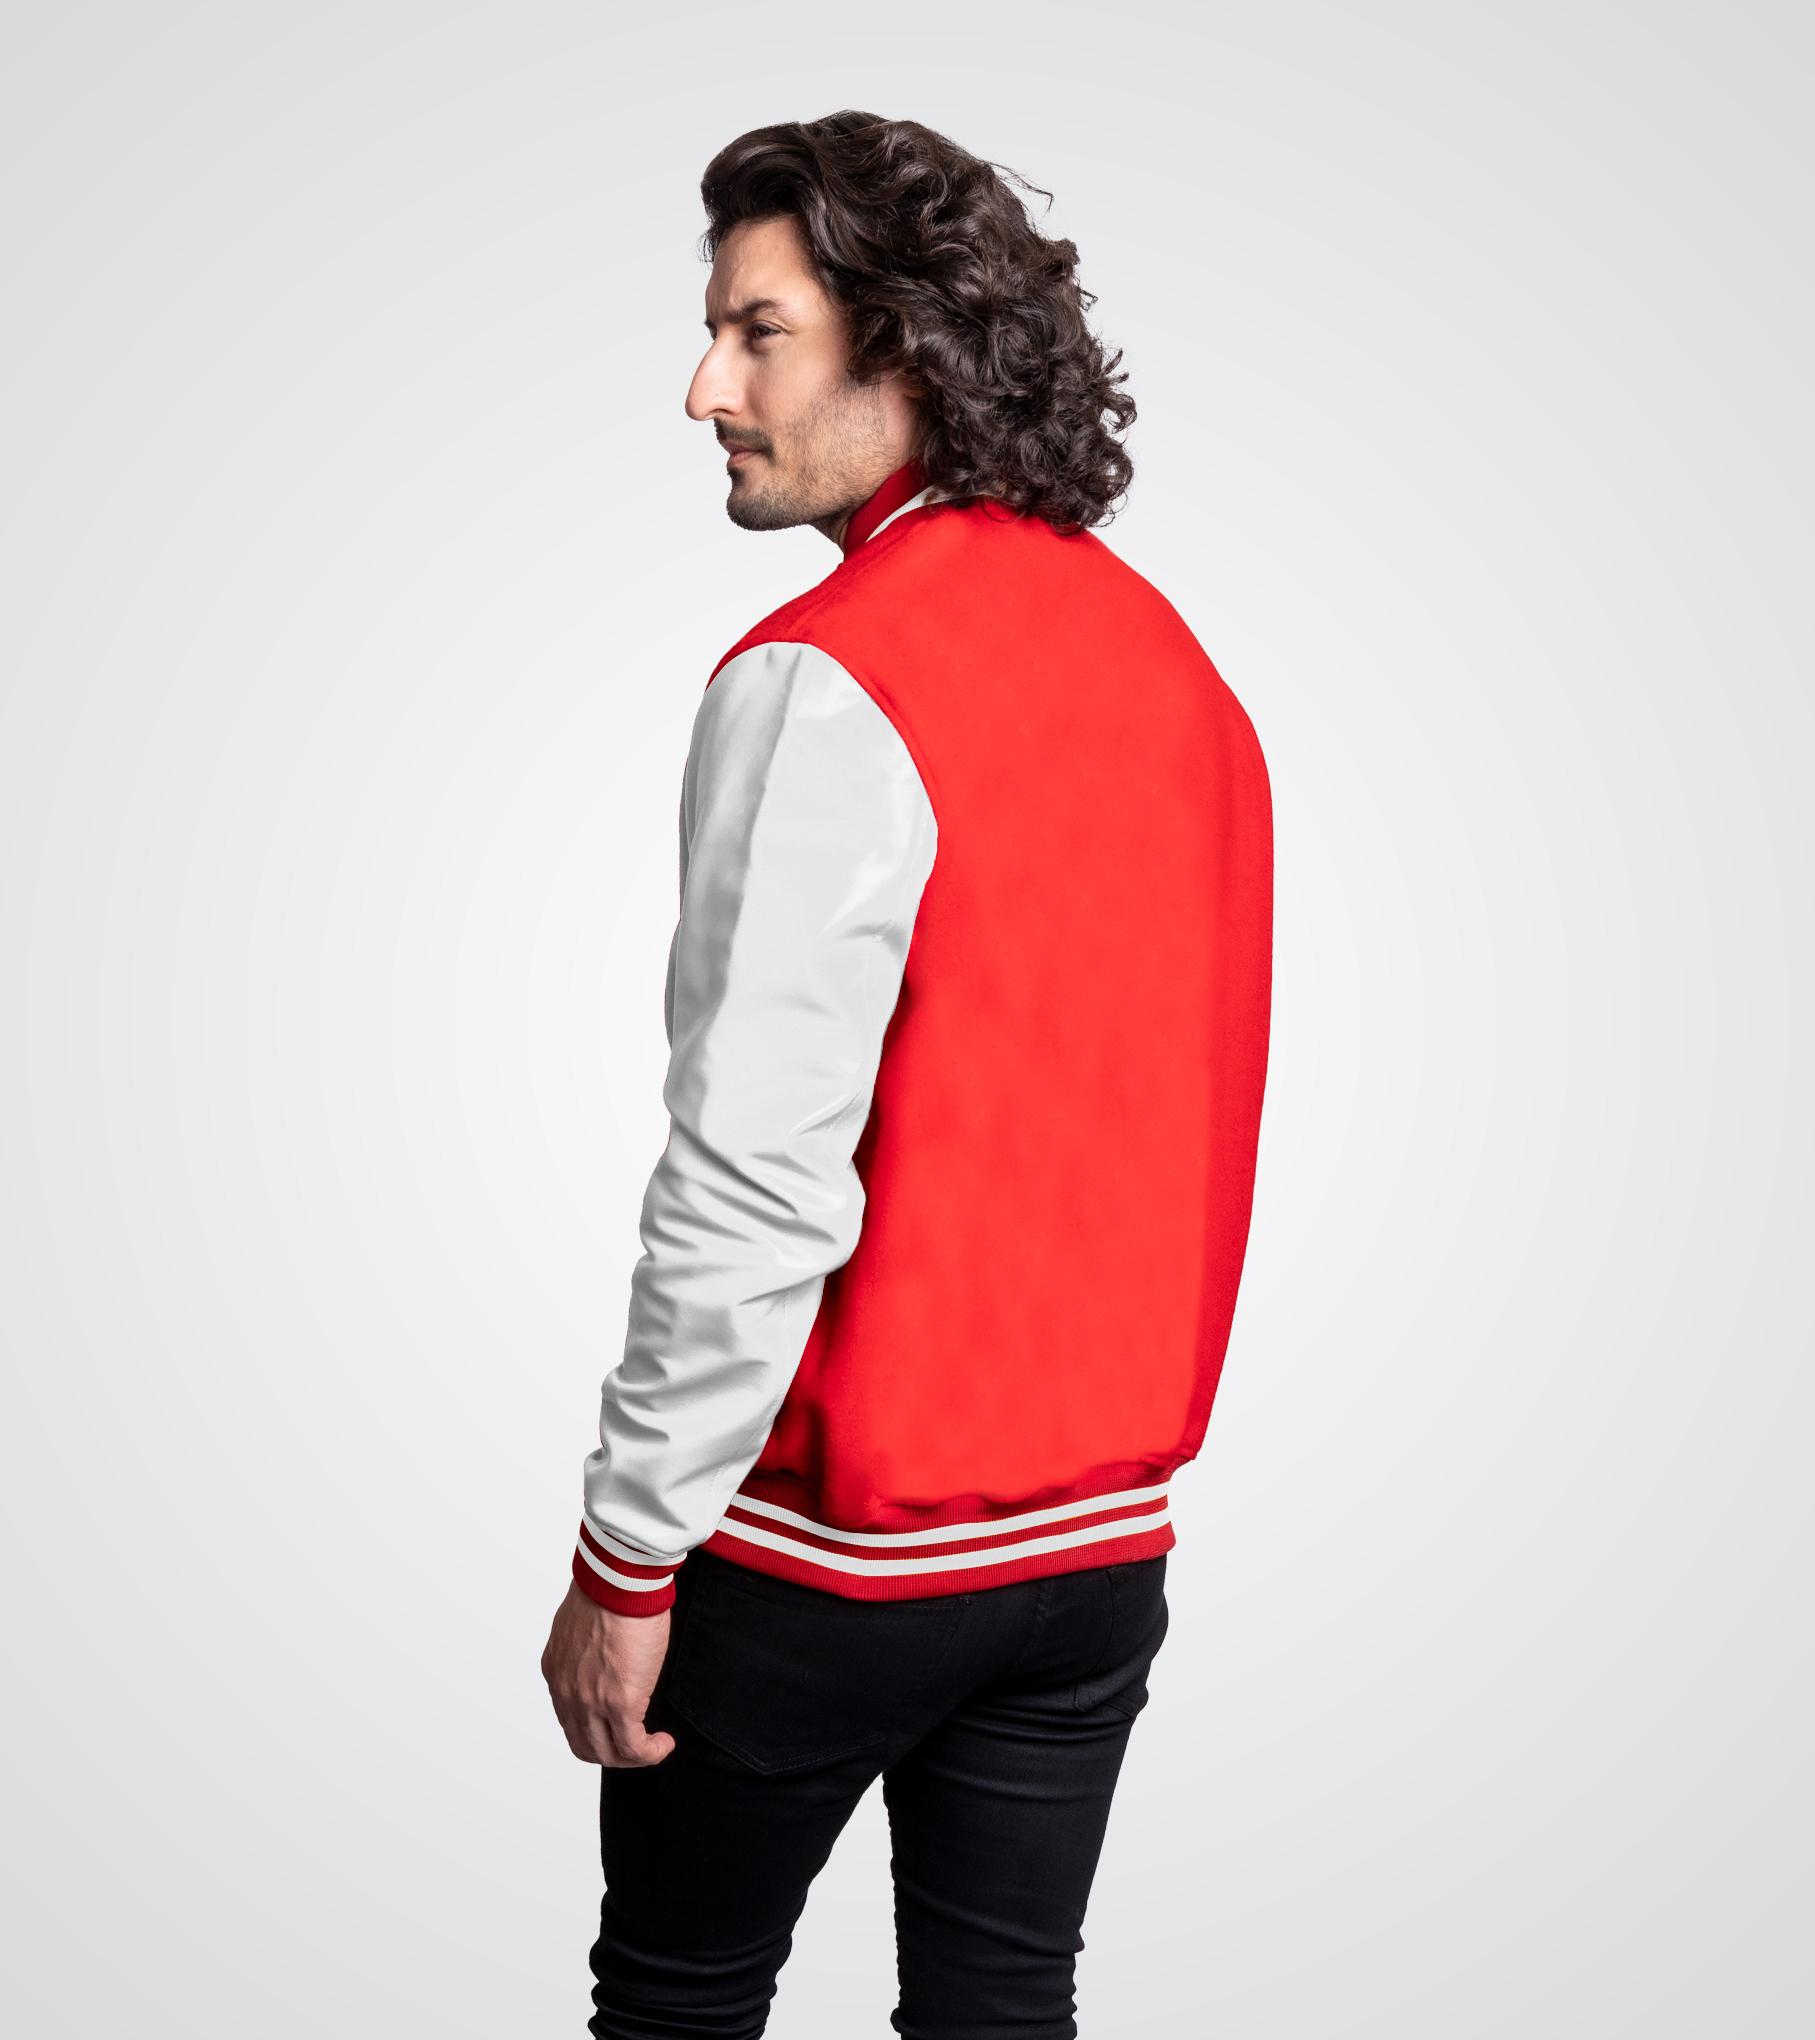 Red and White Varsity Jacket Leather Sleeves